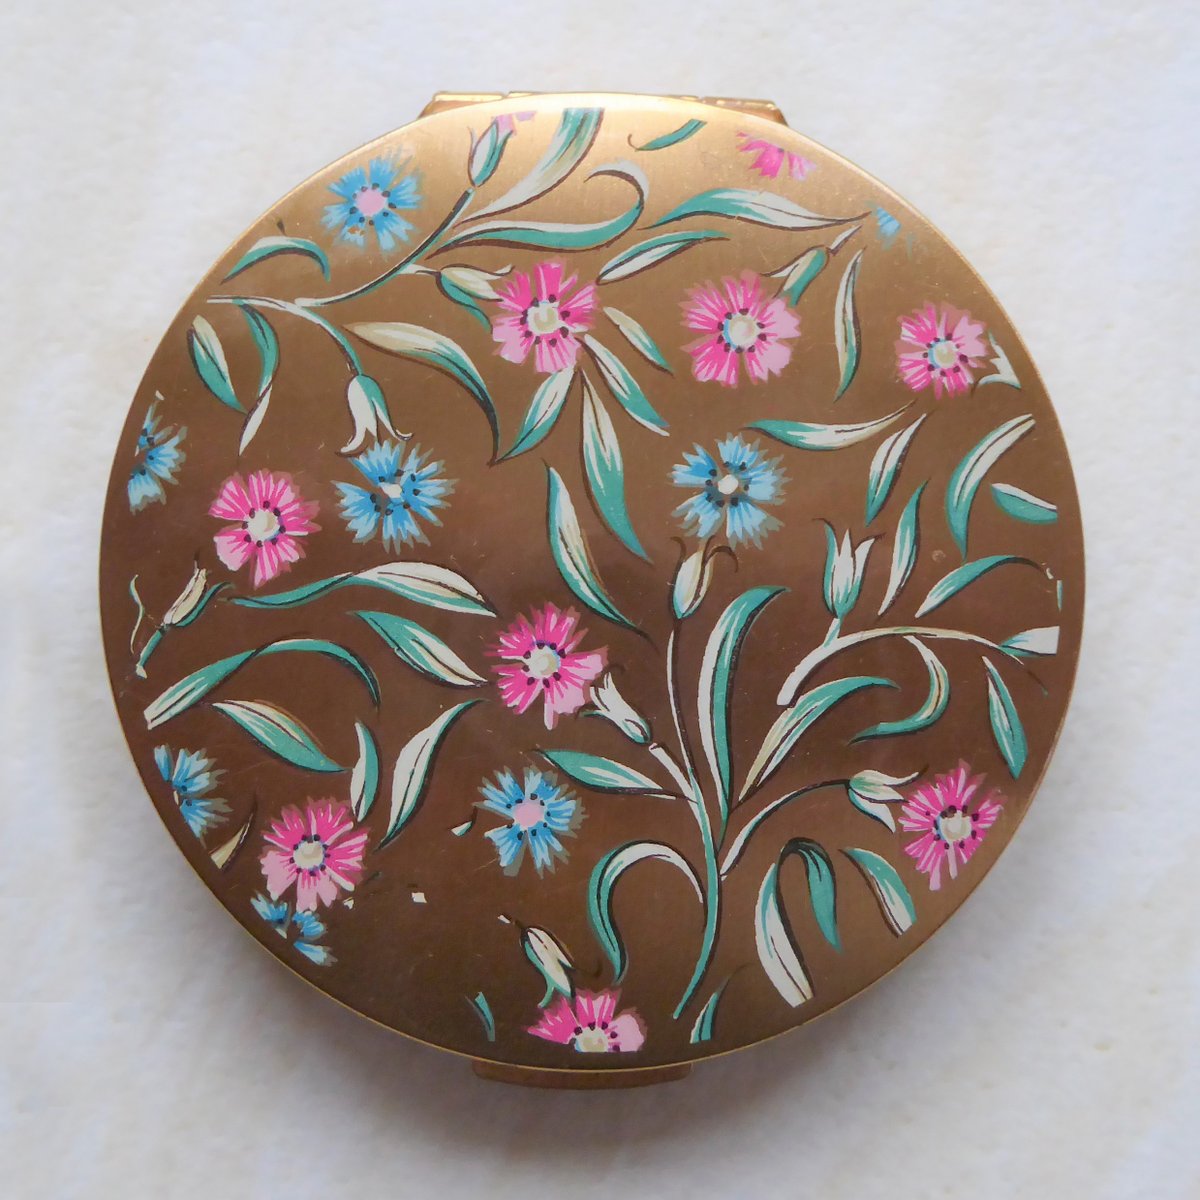 These 2 lovely Vintage Powder Compacts by #Stratton are in the September #Sale in my eBay shop ebay.co.uk/str/millyfiory
#vintagevanity #powdercompact #compactinhand